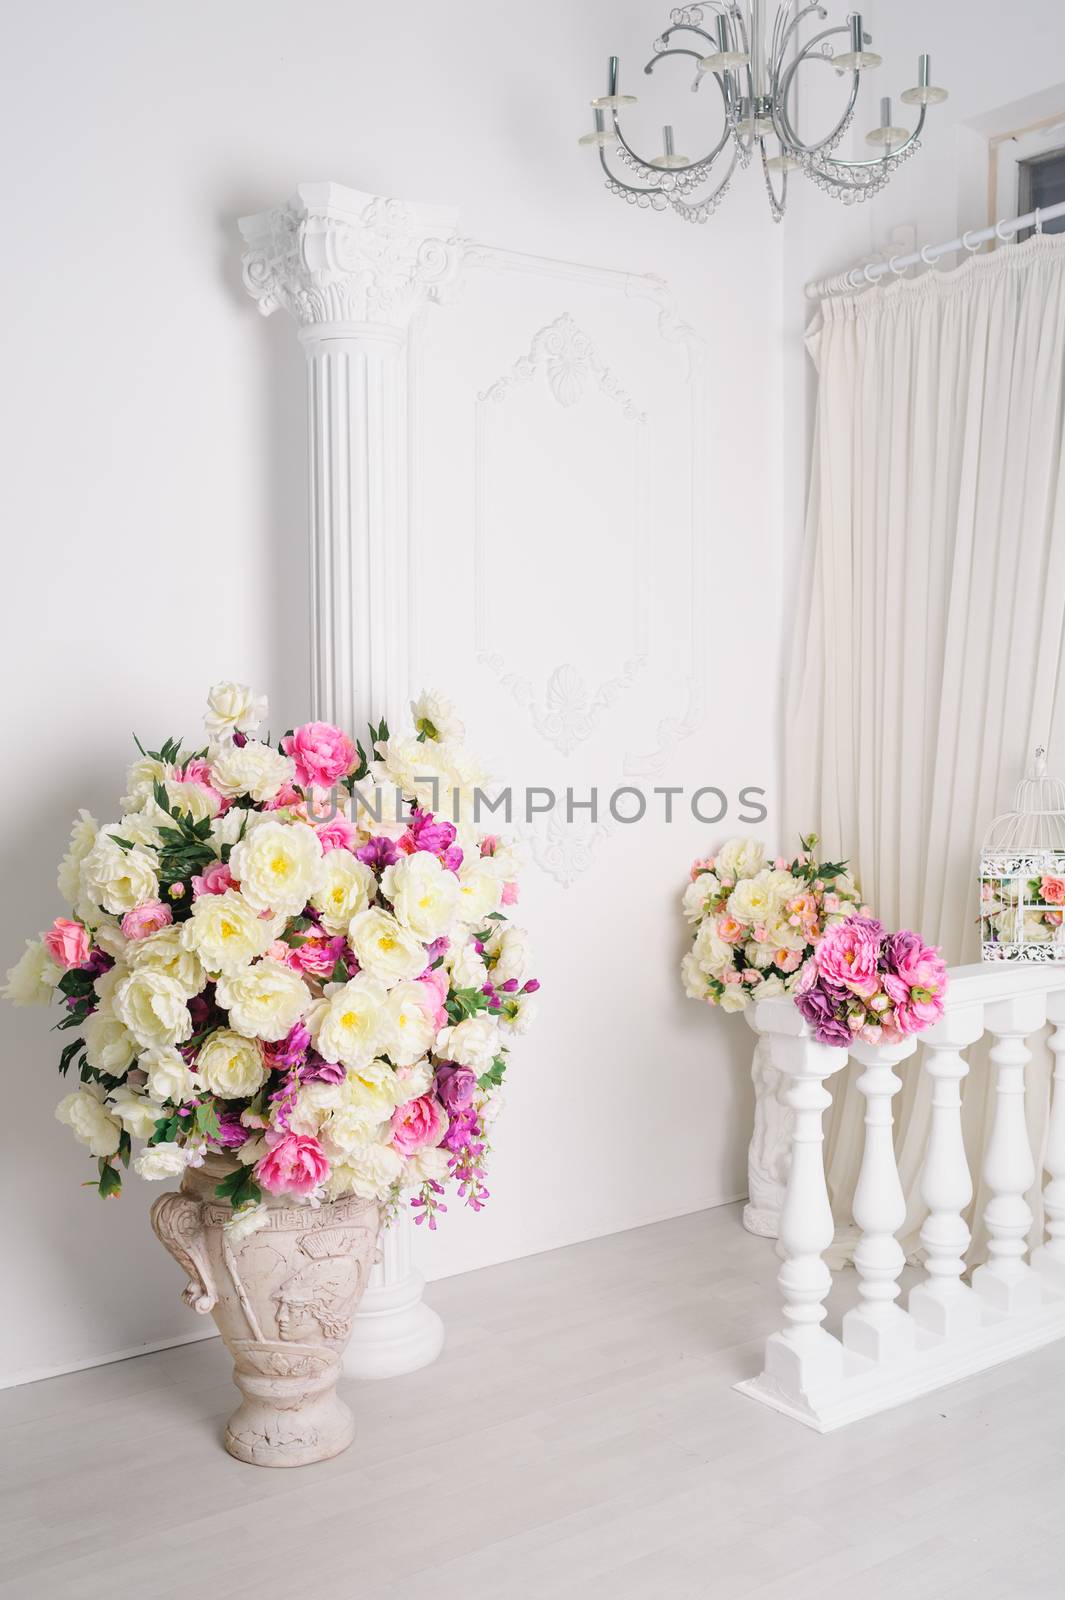 beautiful decoration of flowers in vases in white studio.